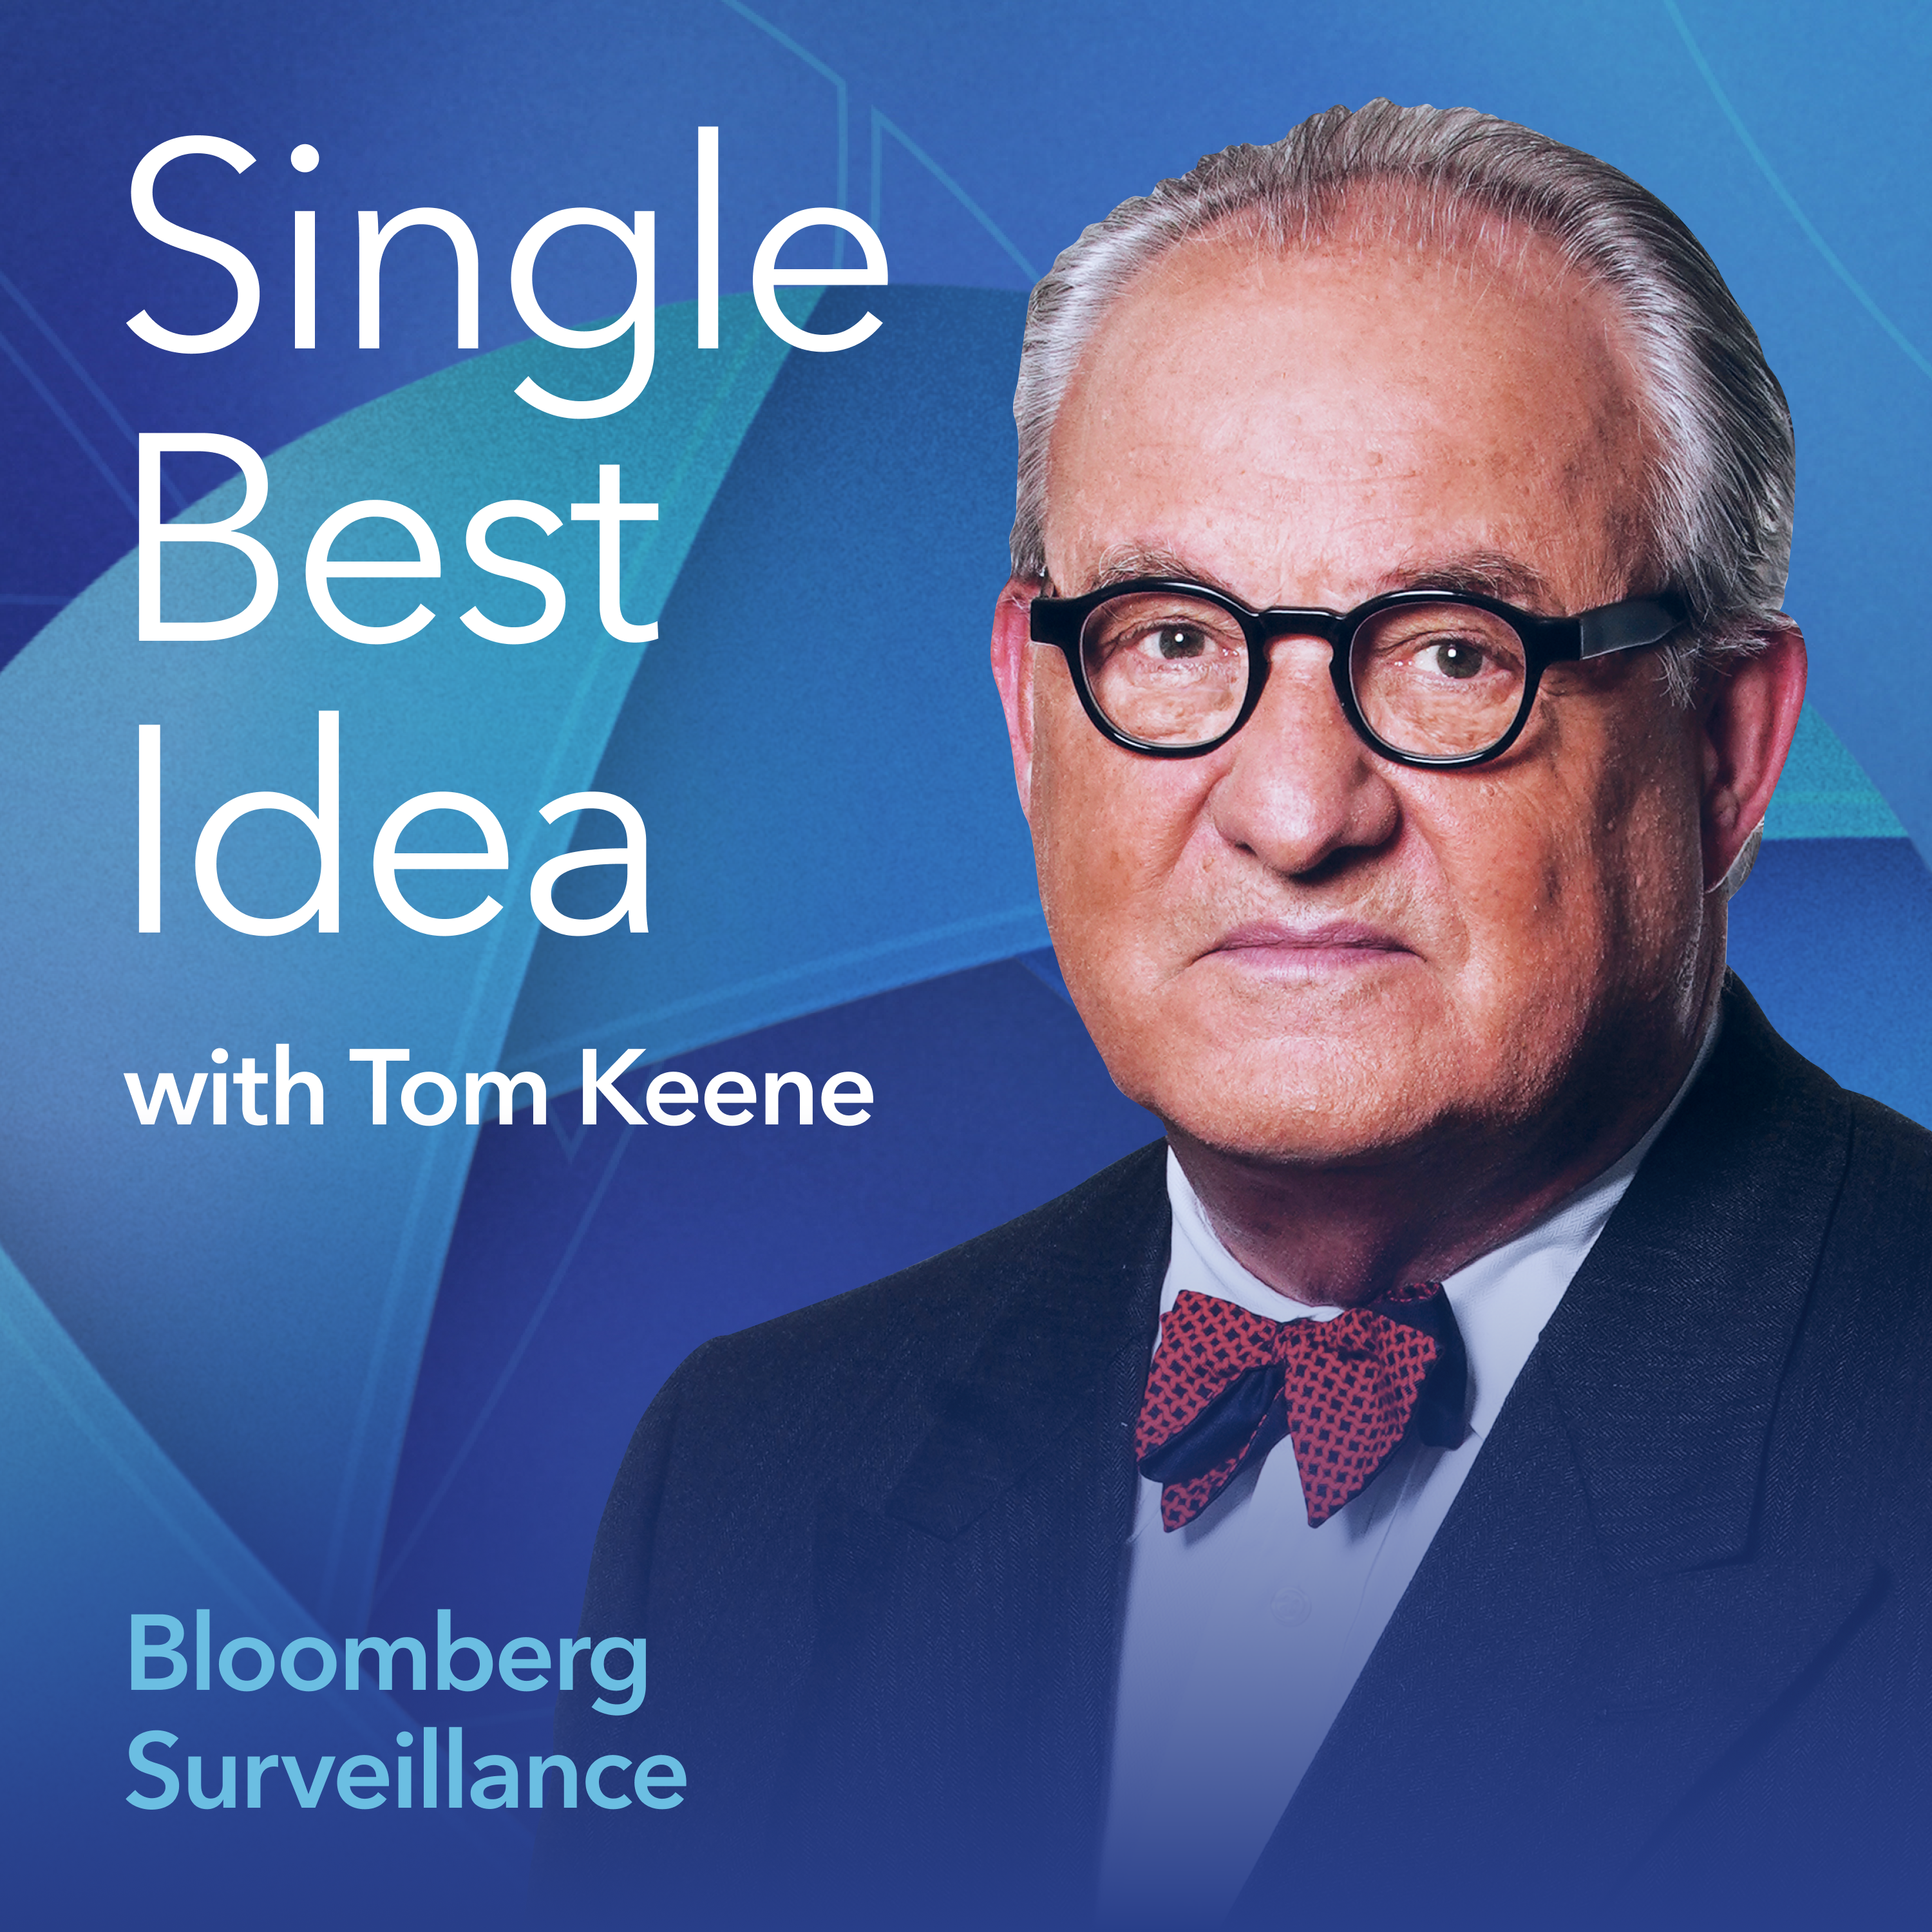 Single Best Idea with Tom Keene: James Stavridis and Ian Bremmer